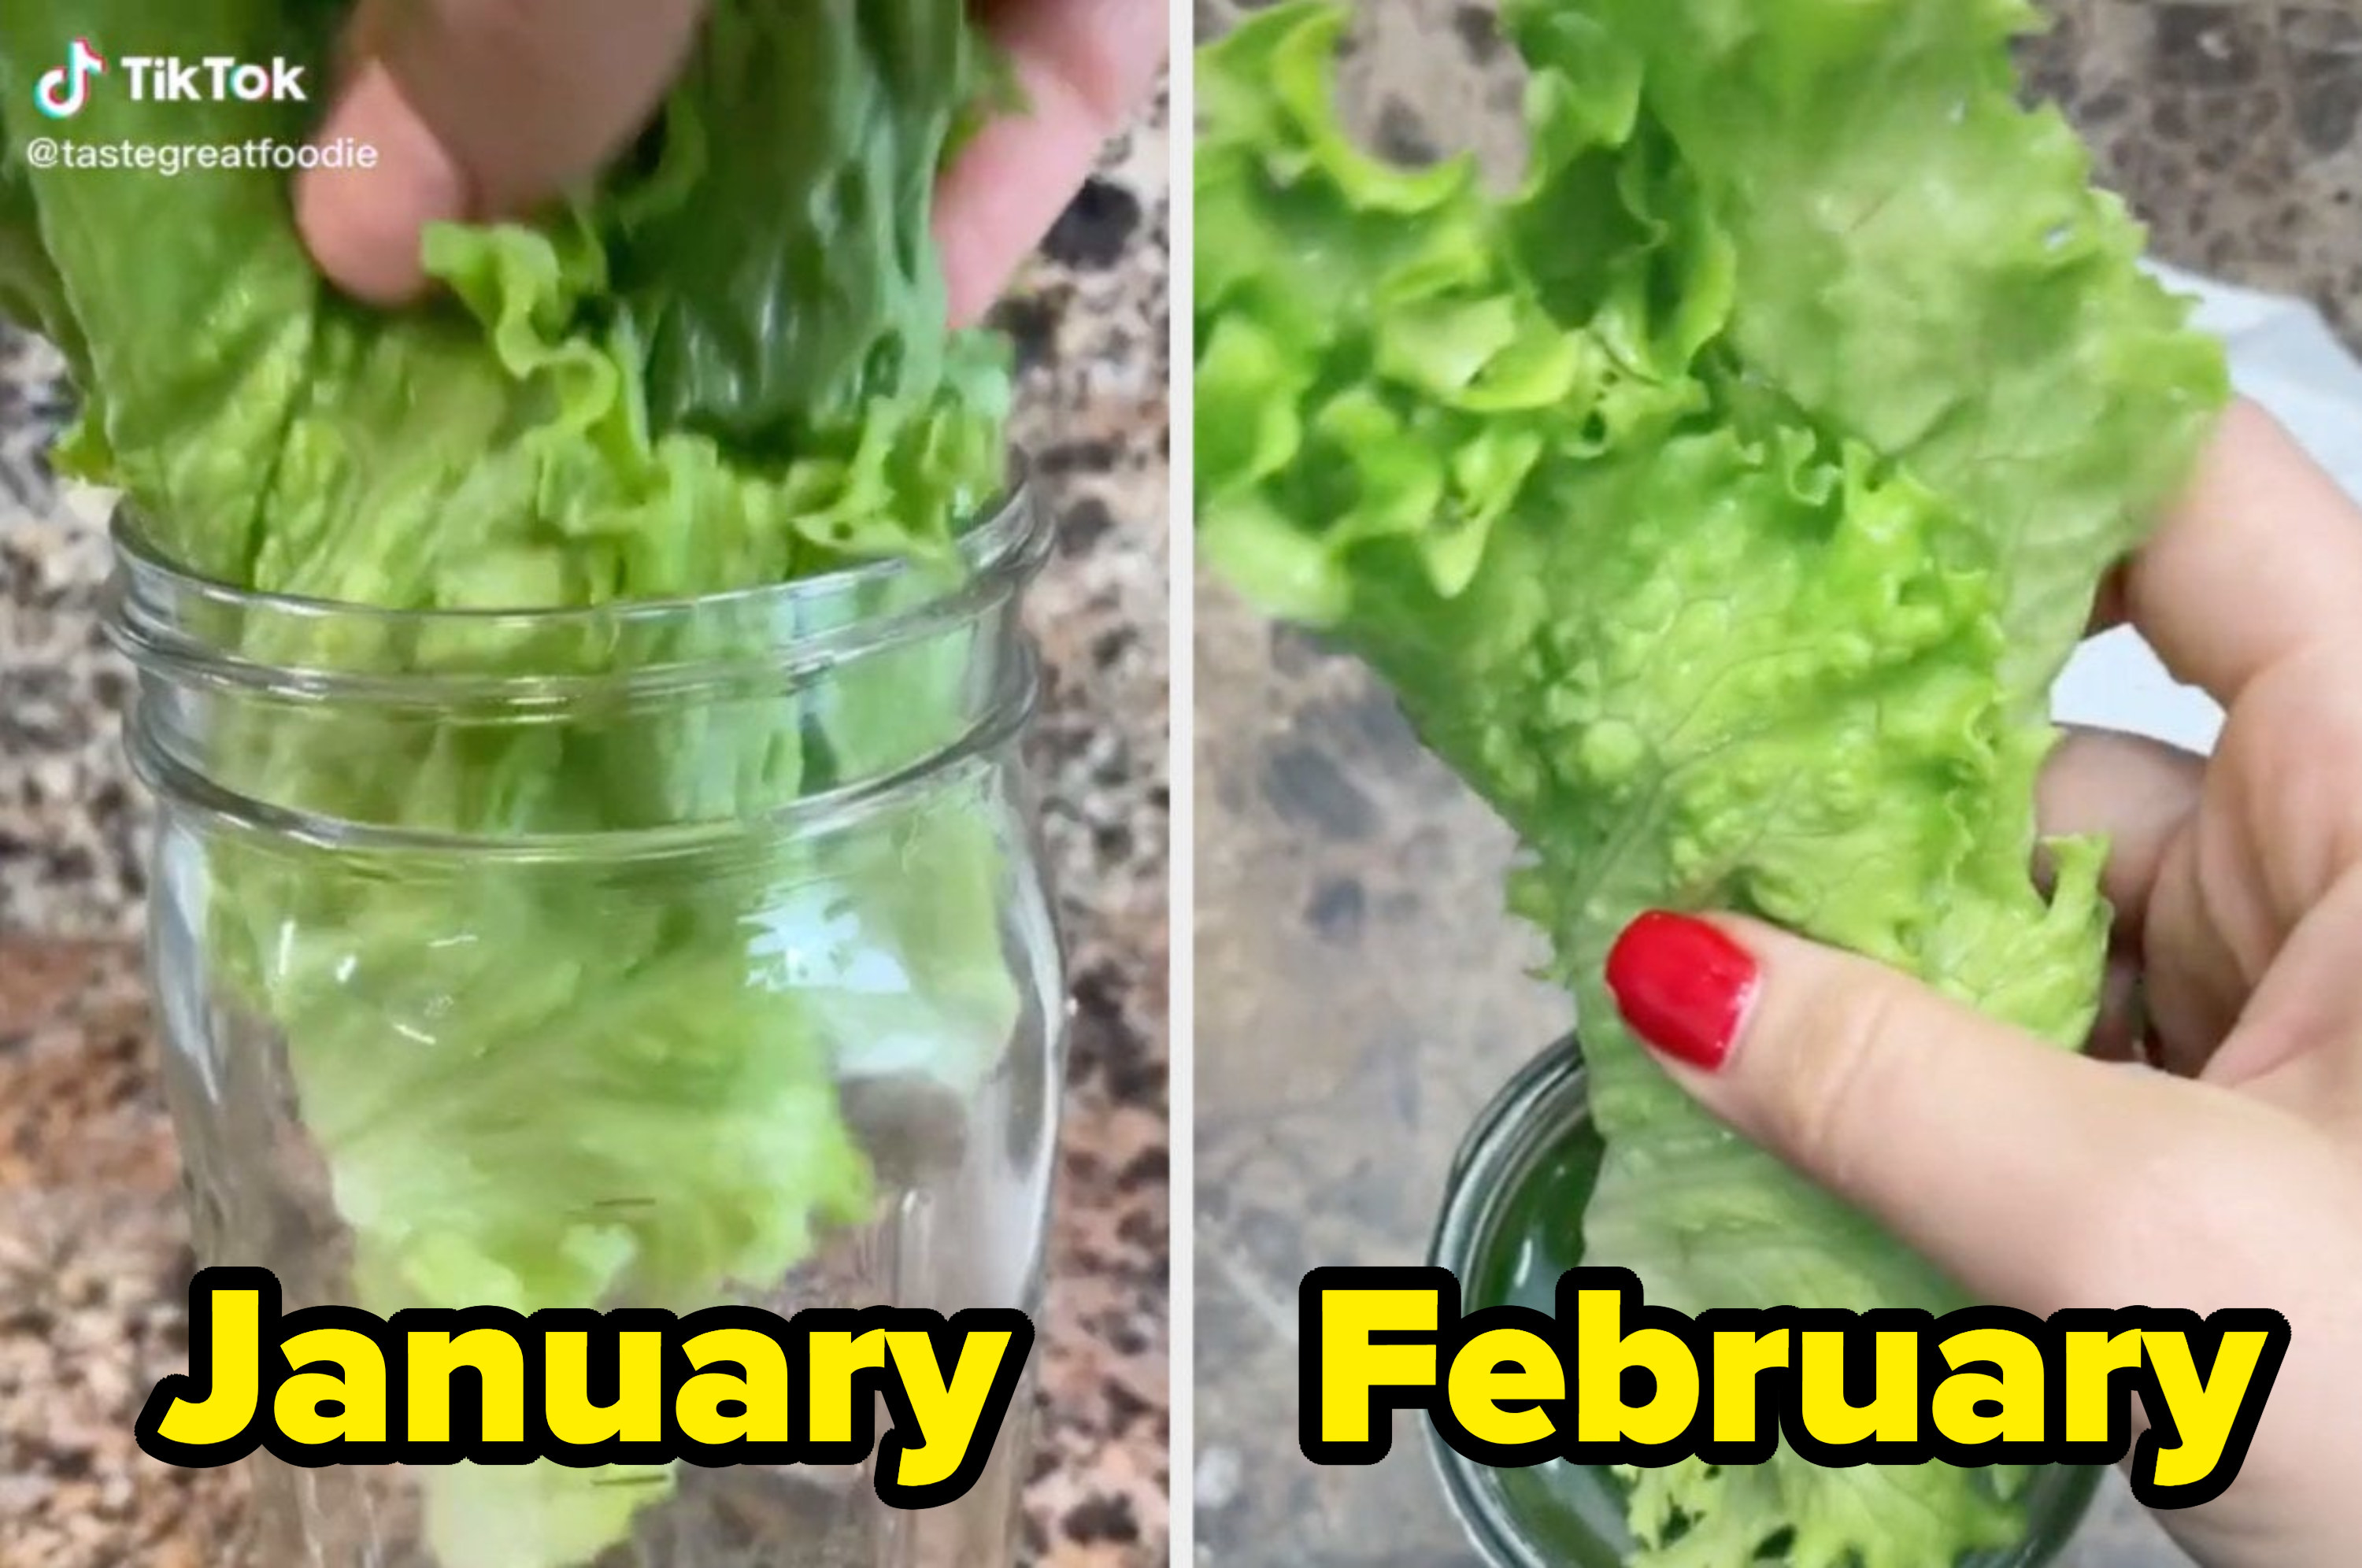 A before-and-after photo: the lettuce in January next to it in February, looking exactly the same